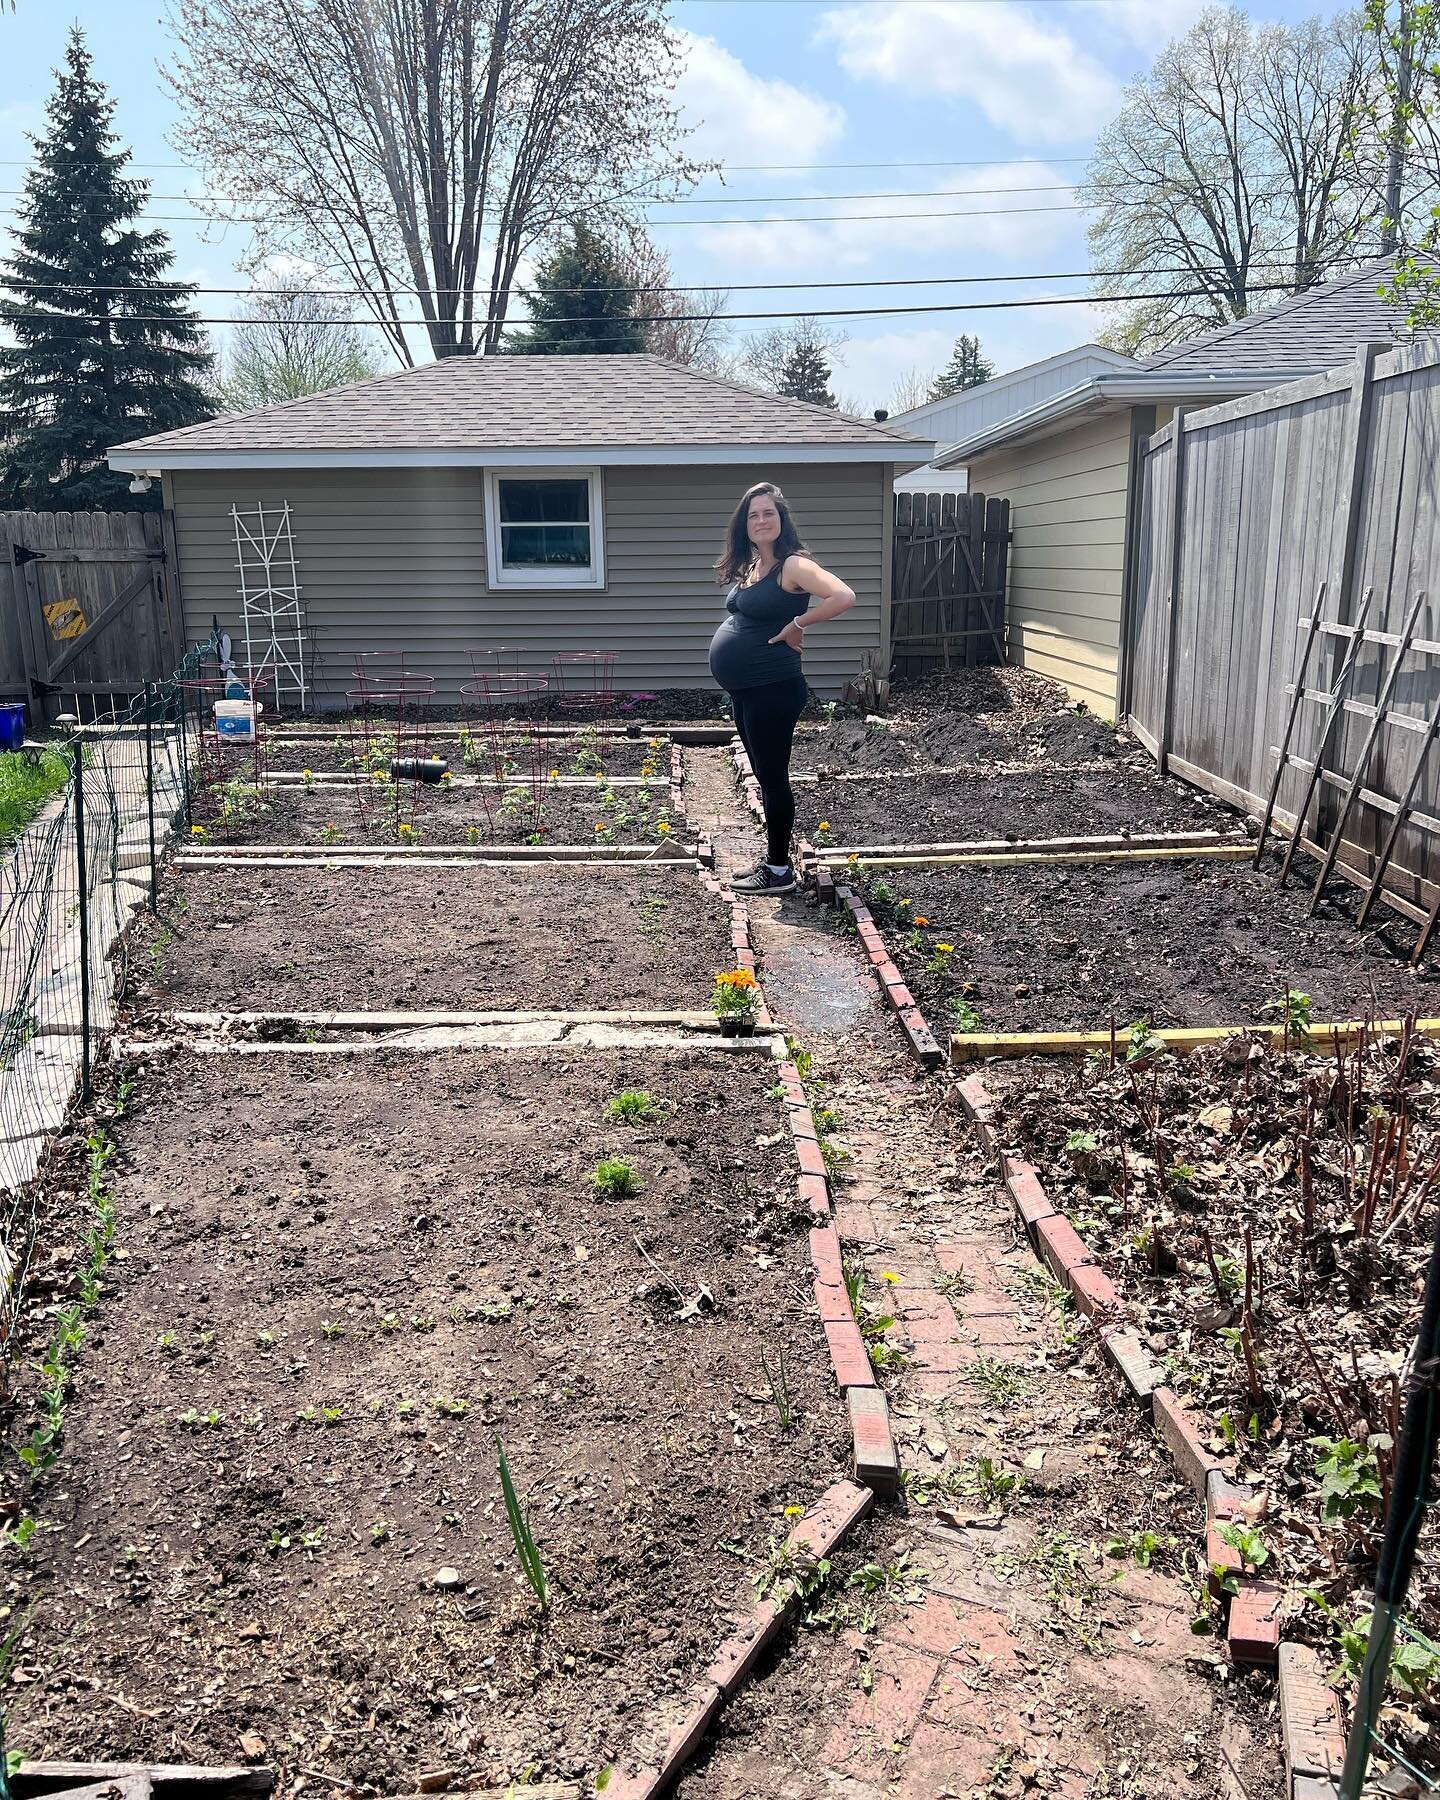 41 weeks and one day preggo (who is counting?!) but at least the garden is planted!!! #stillpregnant #garden #vegetablegarden #bestseason #letsgobaby